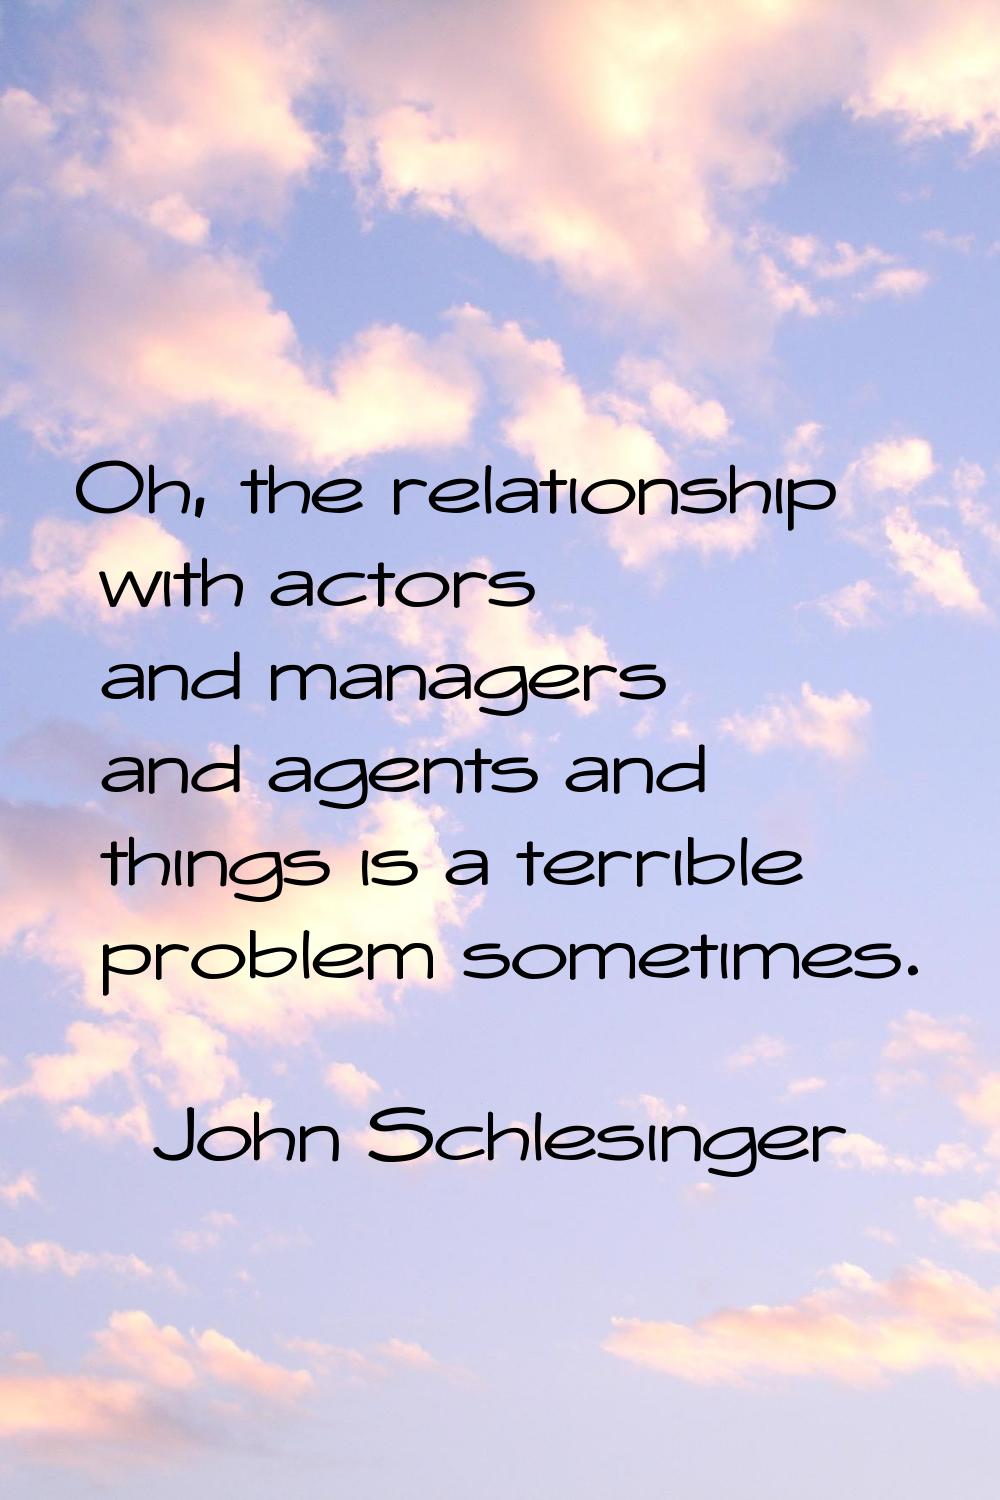 Oh, the relationship with actors and managers and agents and things is a terrible problem sometimes